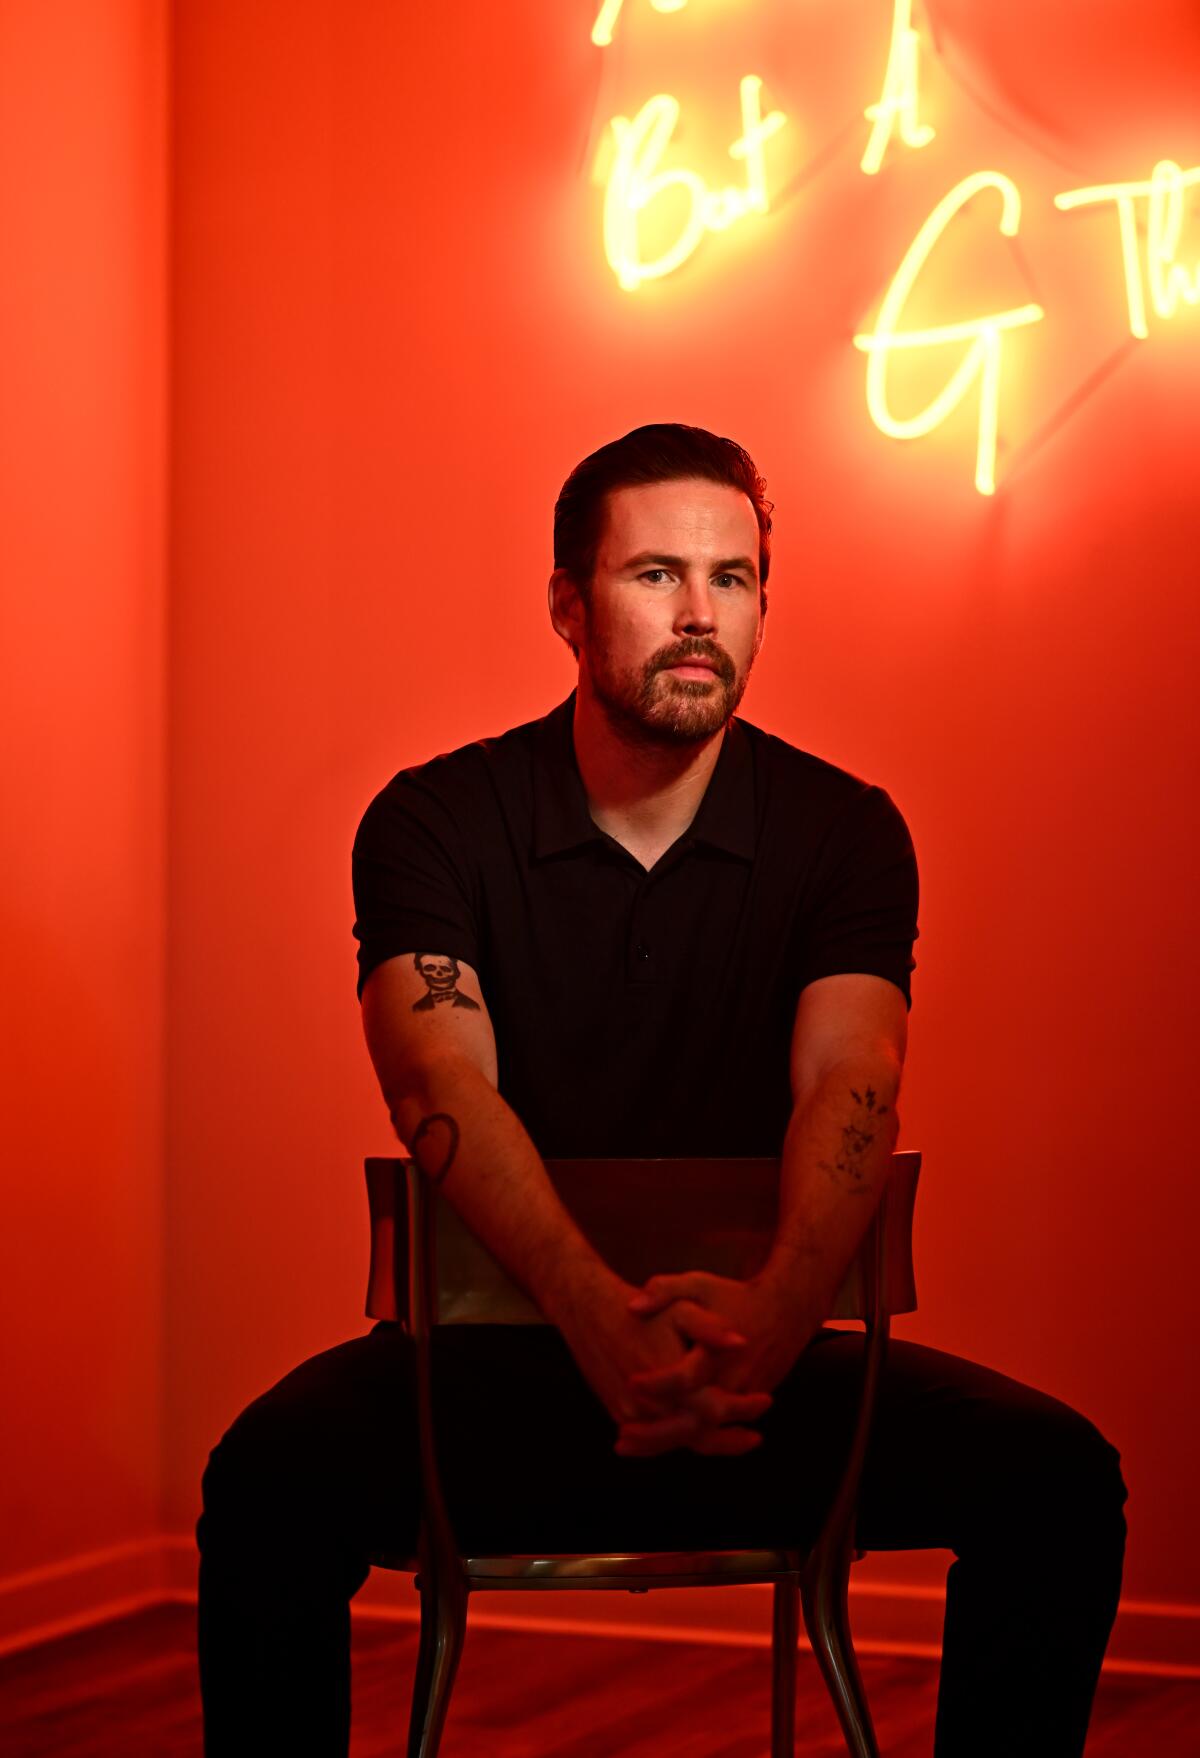 A bearded man in black sits for a portrait in a room bathed in red from a neon light.